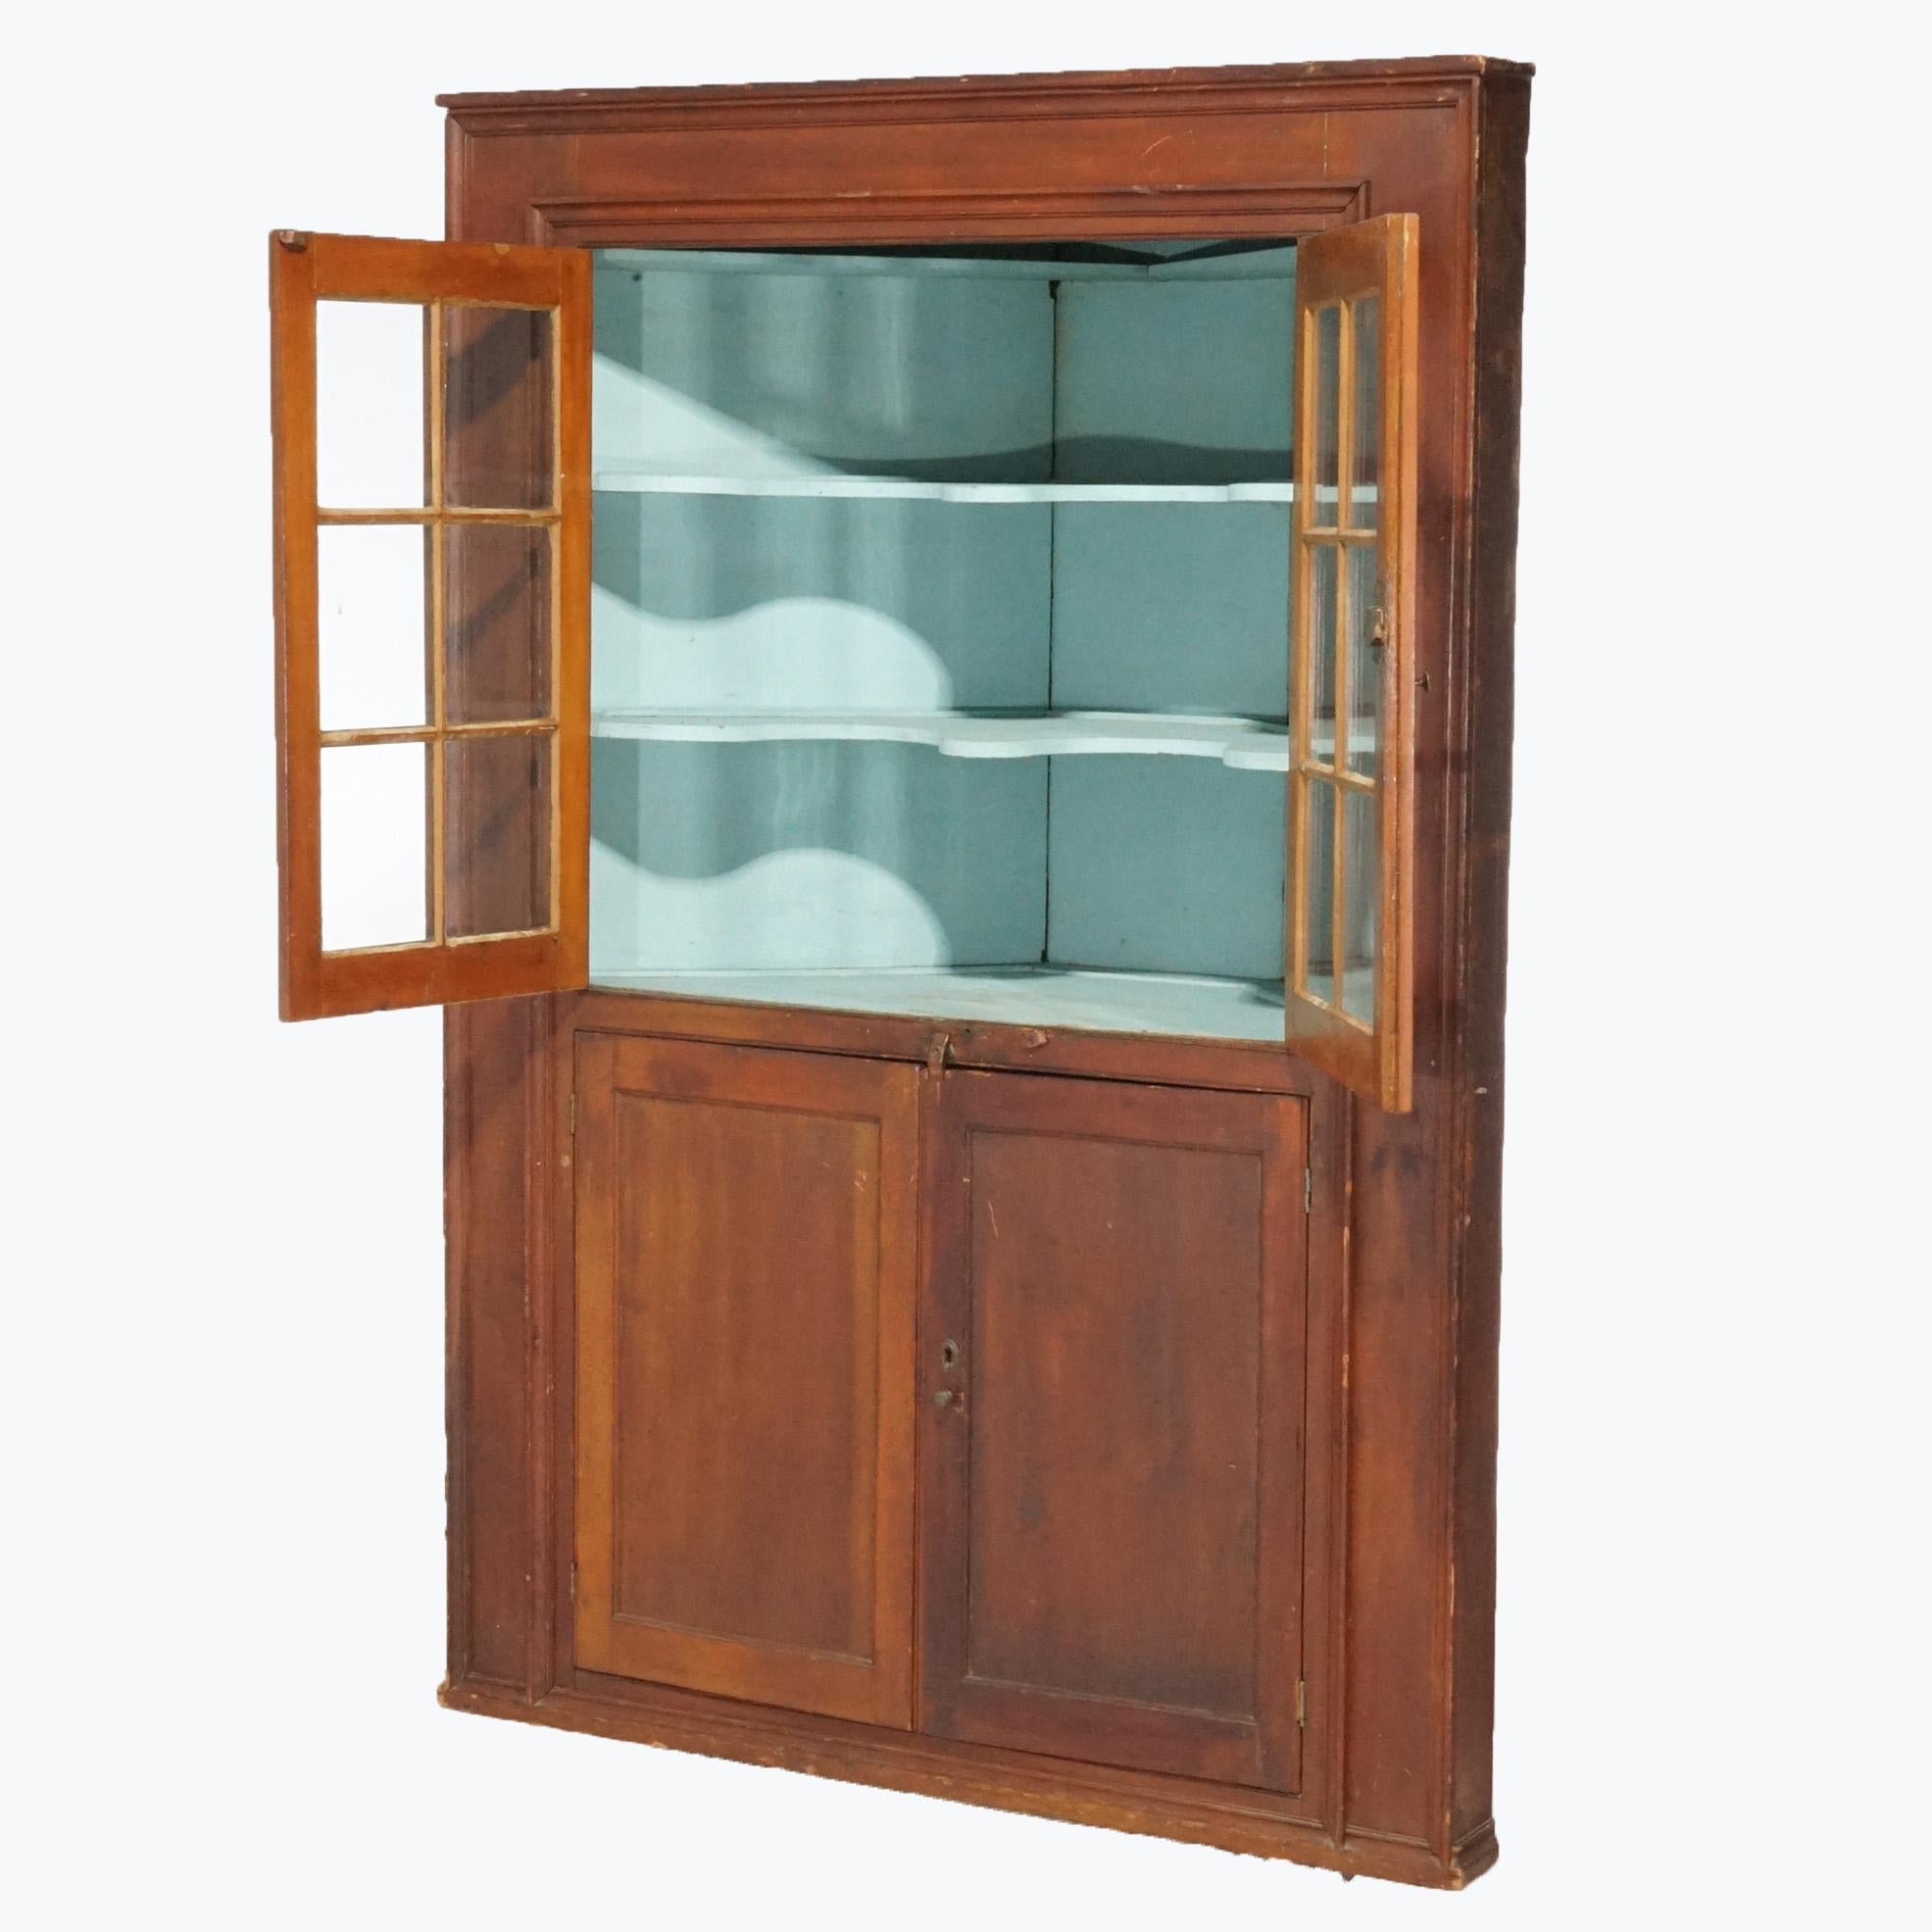 An antique Pennsylvania corner cupboard offers cherry construction with upper having double six-pane doors opening to shelved interior over lower blind cabinet c1820

Measures- 74.75''H x 51.25''W x 22.5''D